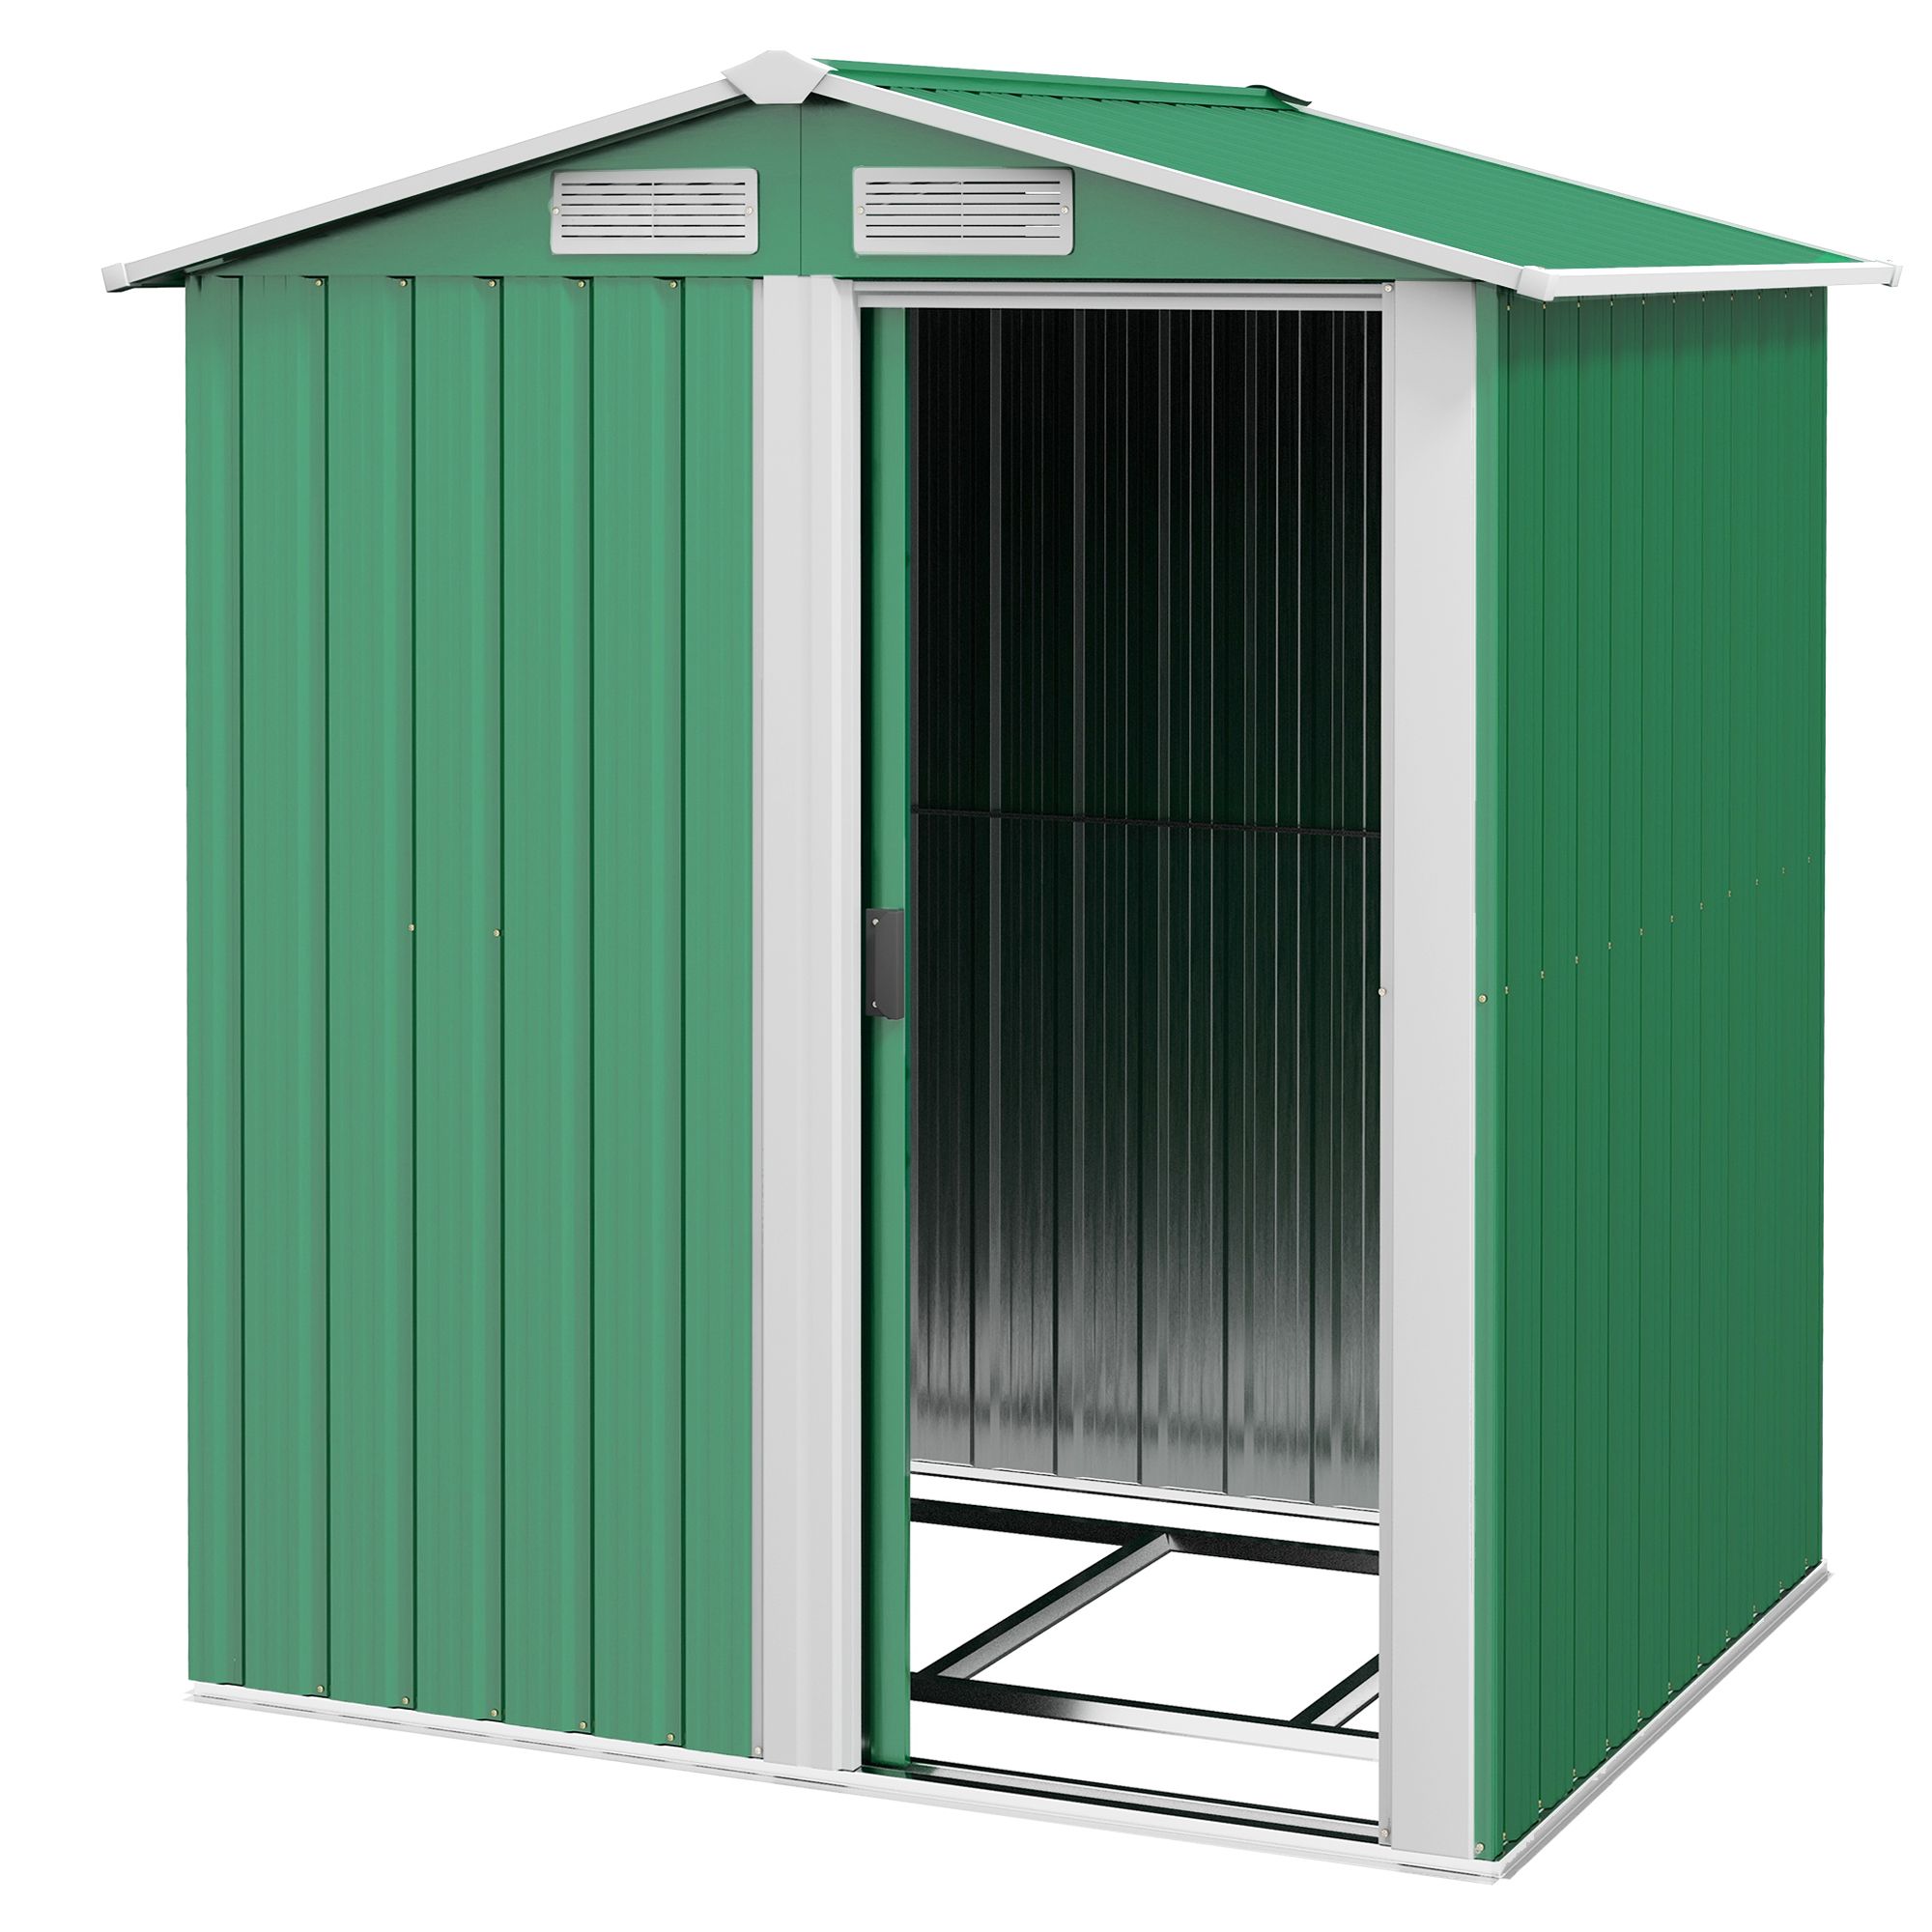 Outsunny Garden Metal Tool Storage Shed With Sliding Door, Sloped Roof And Floor Foundation, 152 X 132 X 188cm, Green